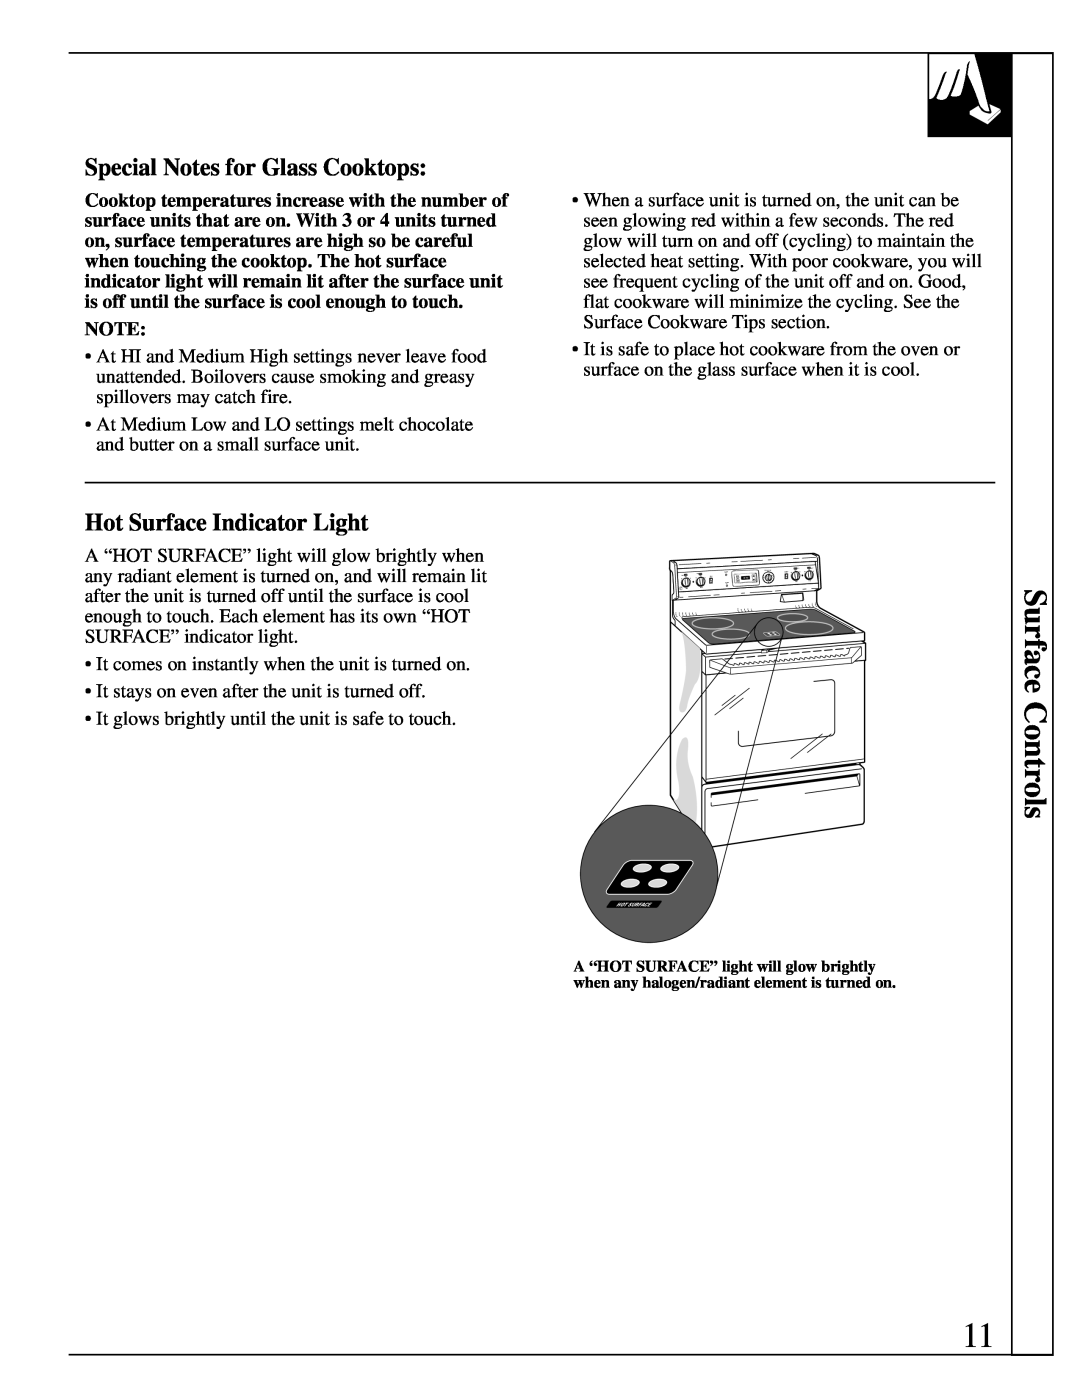 GE 10-95 CG warranty Surface Controls, Special Notes for Glass Cooktops, Hot Surface Indicator Light 